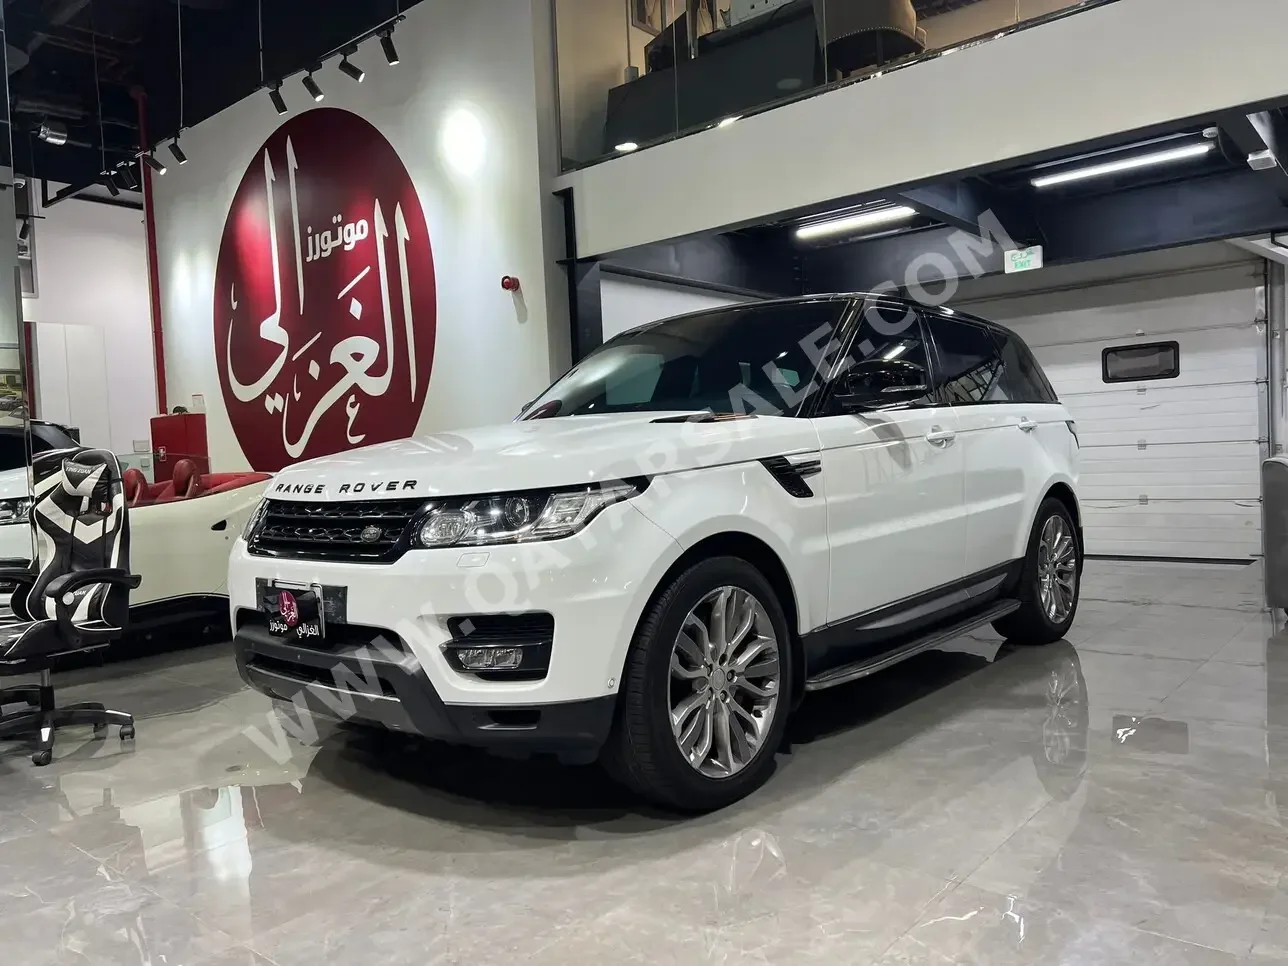 Land Rover  Range Rover  Sport  2017  Automatic  95,000 Km  8 Cylinder  Four Wheel Drive (4WD)  SUV  White